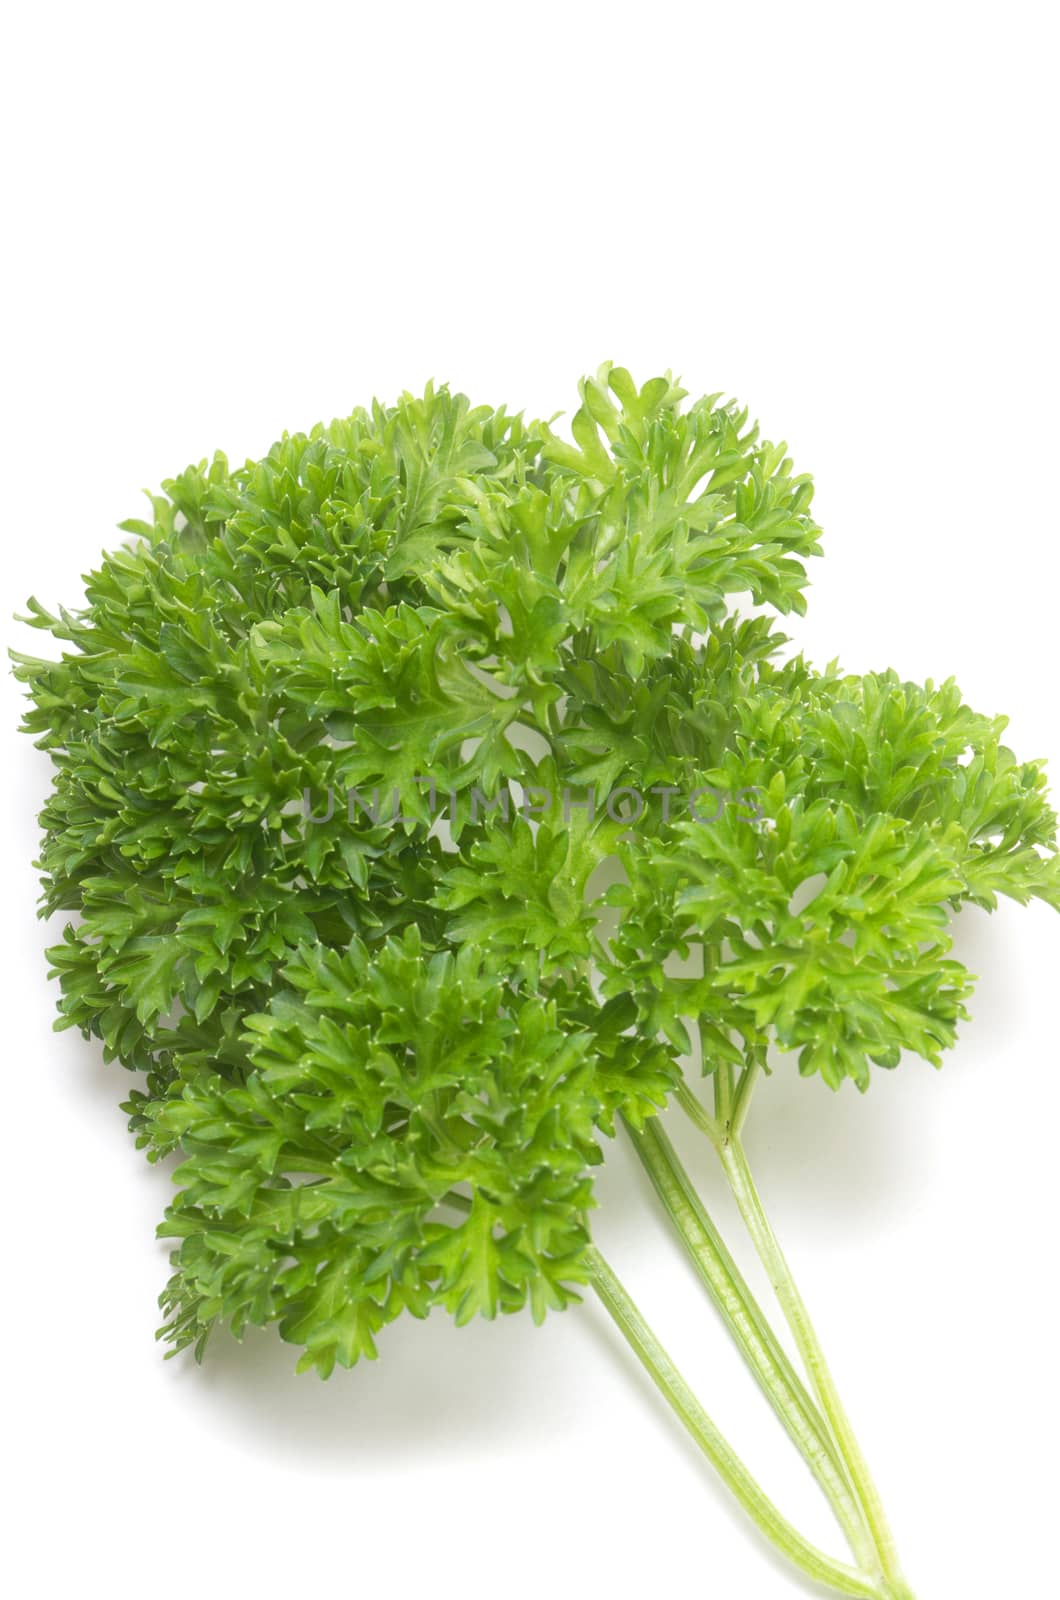 Bunch of fresh Parsley on white background by daoleduc